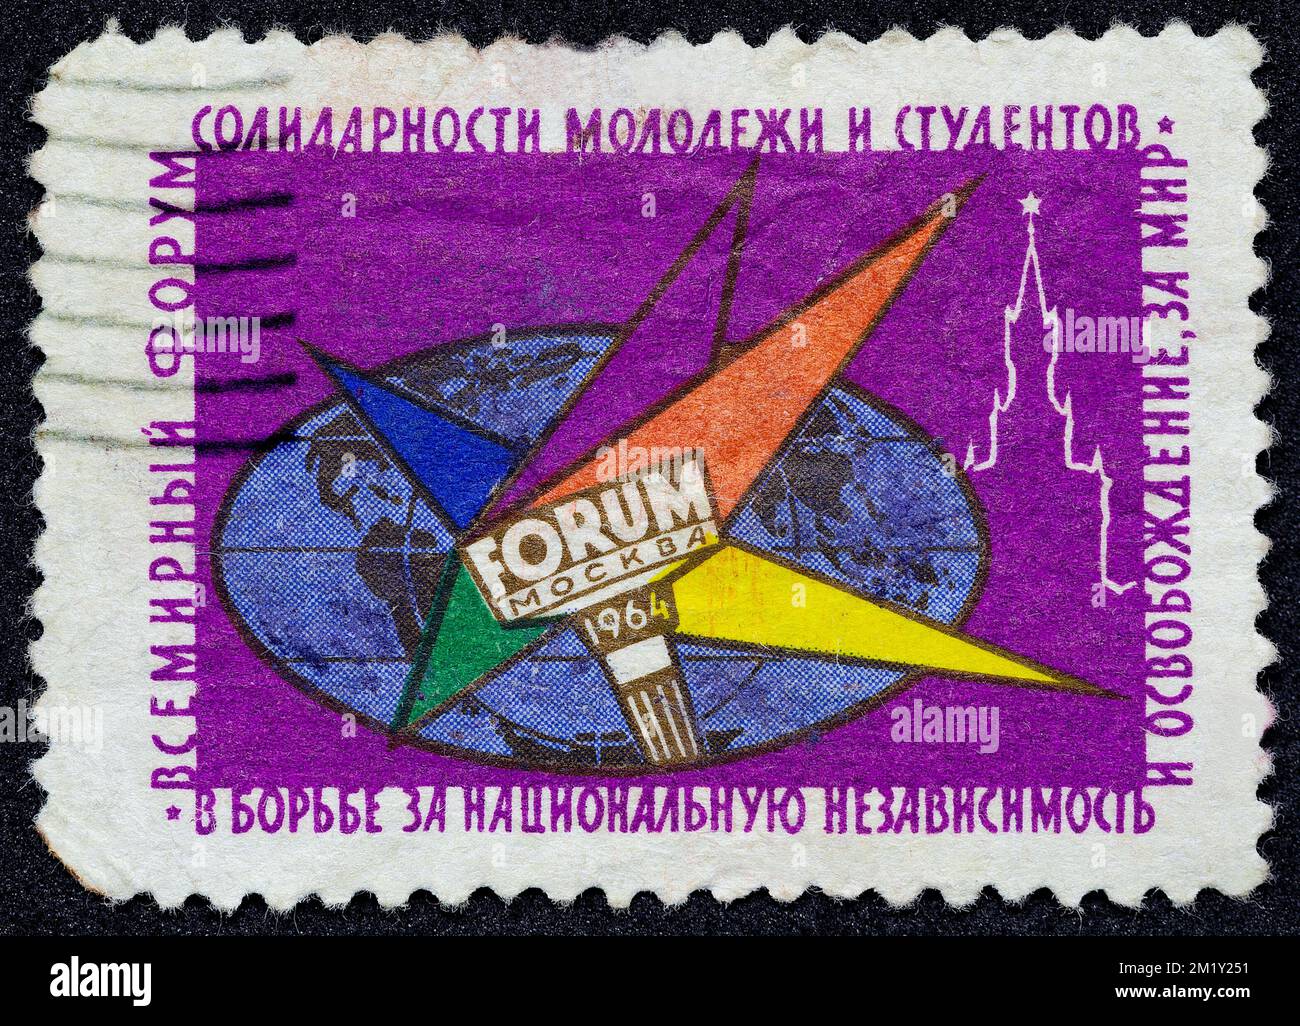 USSR - CIRCA 1964: Postage stamp 5 kopeck printed in the Soviet Union shows Torch, Globe and Moscow Kremlin. Post stamp series devoted to World Forum Stock Photo